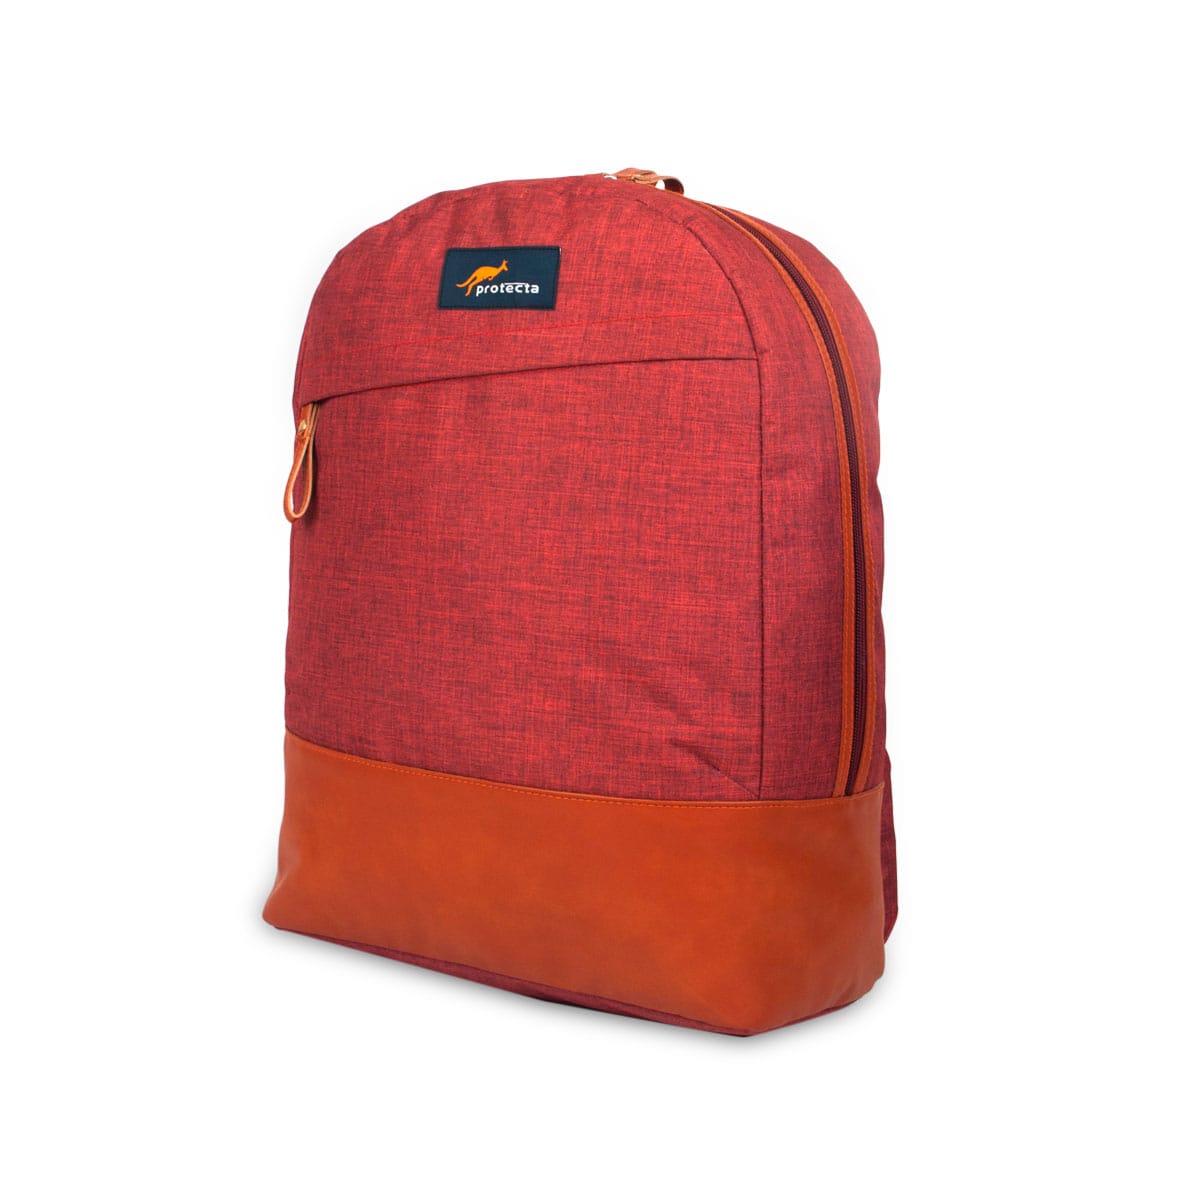 Tan-Rust-Red, Protecta Private Access Casual Backpack-2